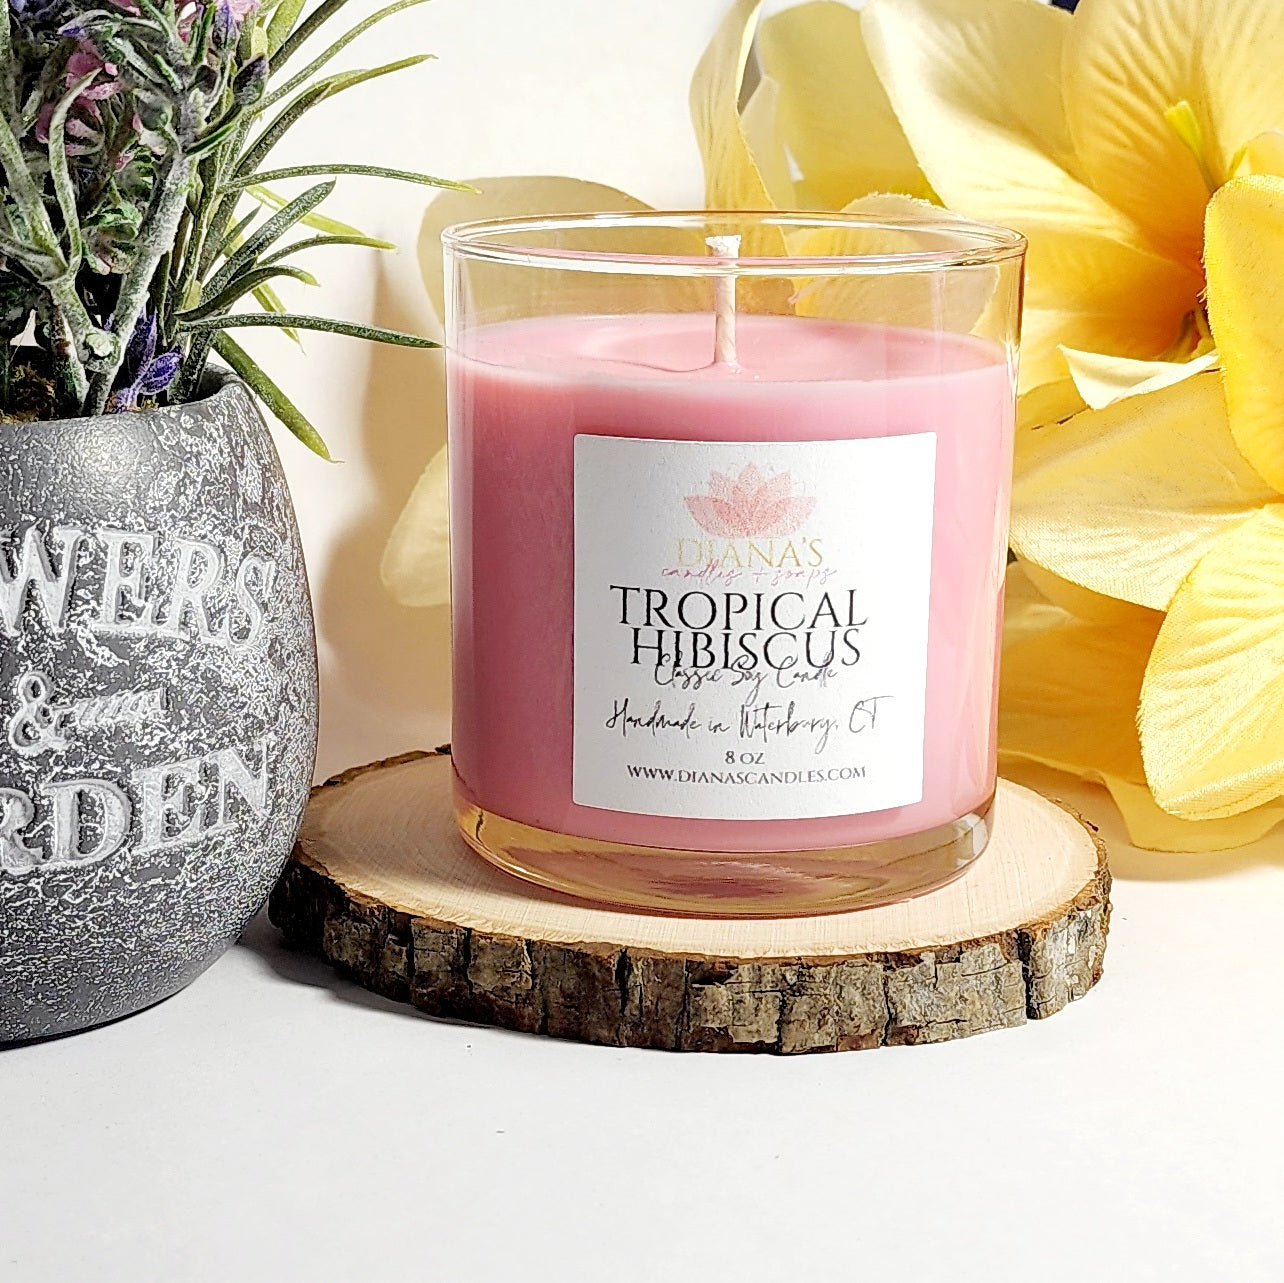 Tropical Hibiscus Candle - Diana's Candles and Soaps 